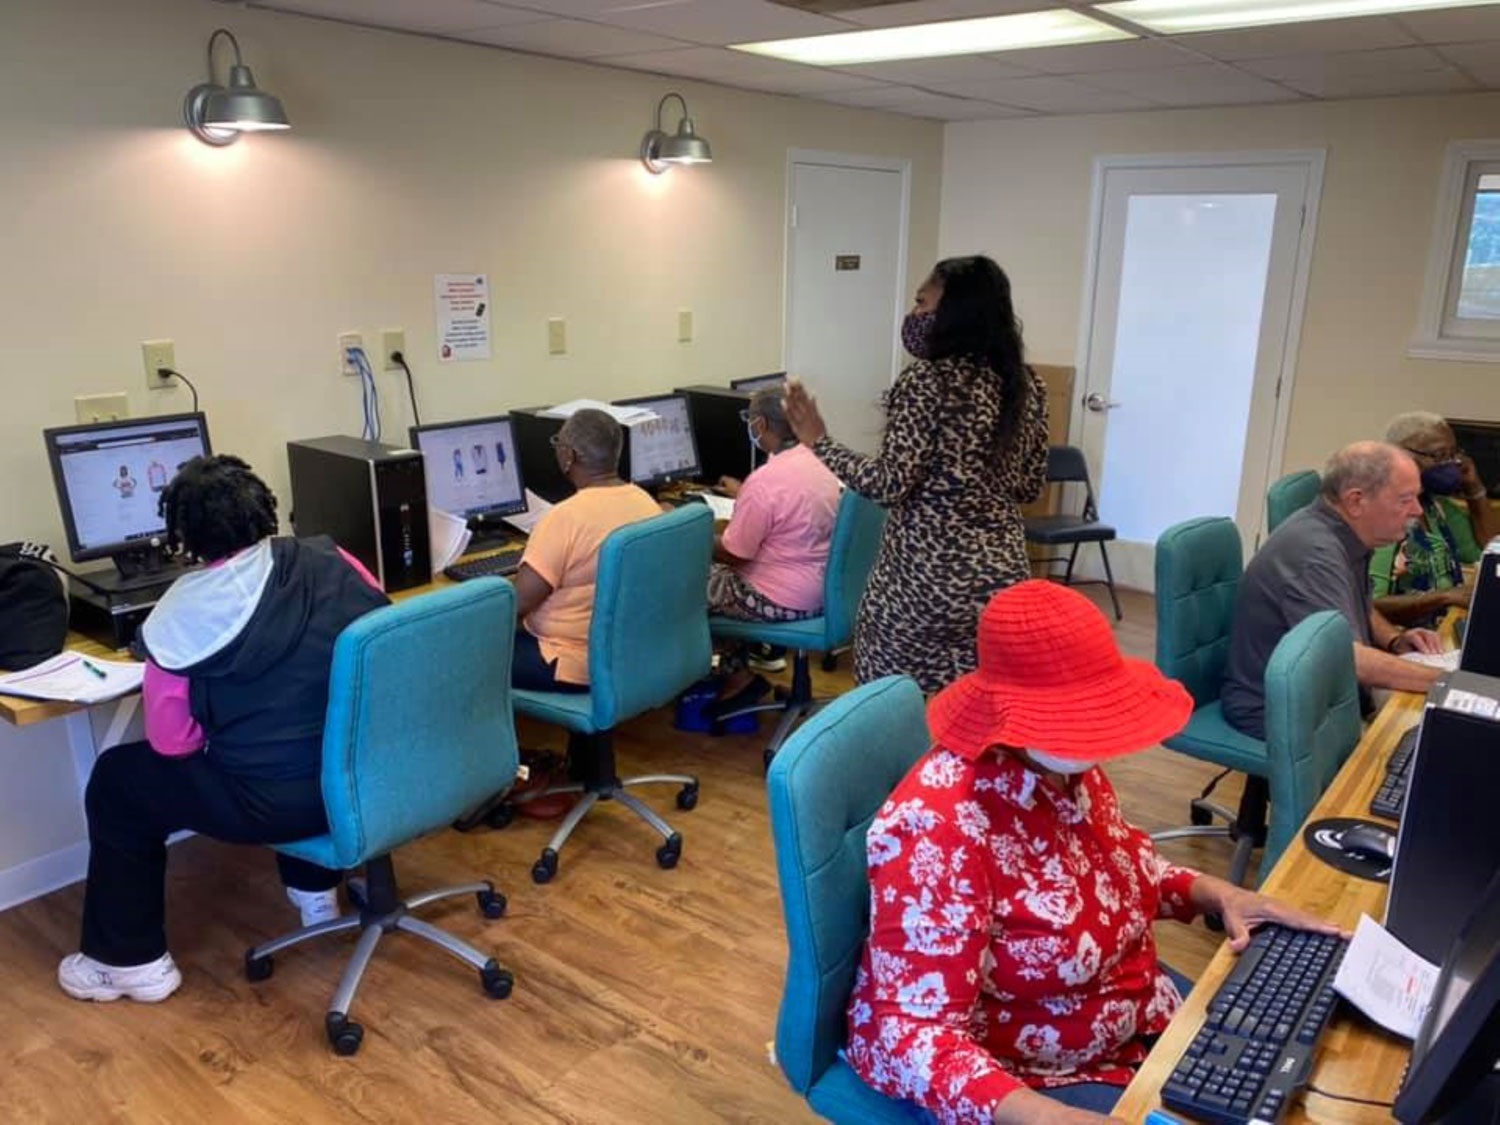 Ja’queta Pugh-Stevenson teaches a computer readiness class at the Hertford County Department of Aging senior center in Winton.